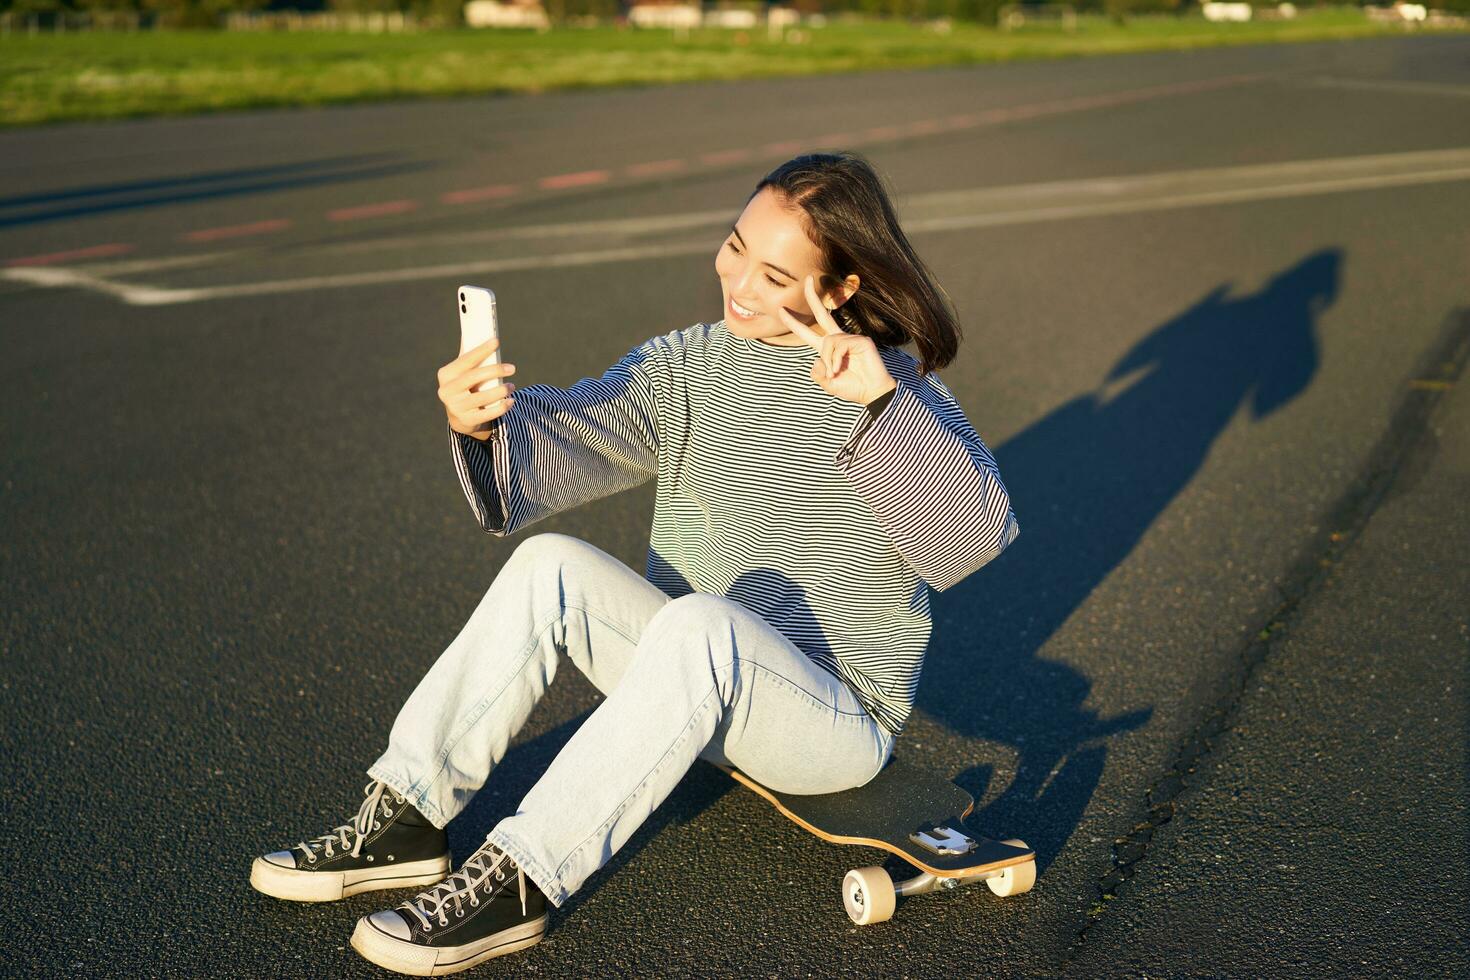 Happy asian girl sits on skateboard, takes selfie with longboard, makes cute faces, sunny day outdoors photo